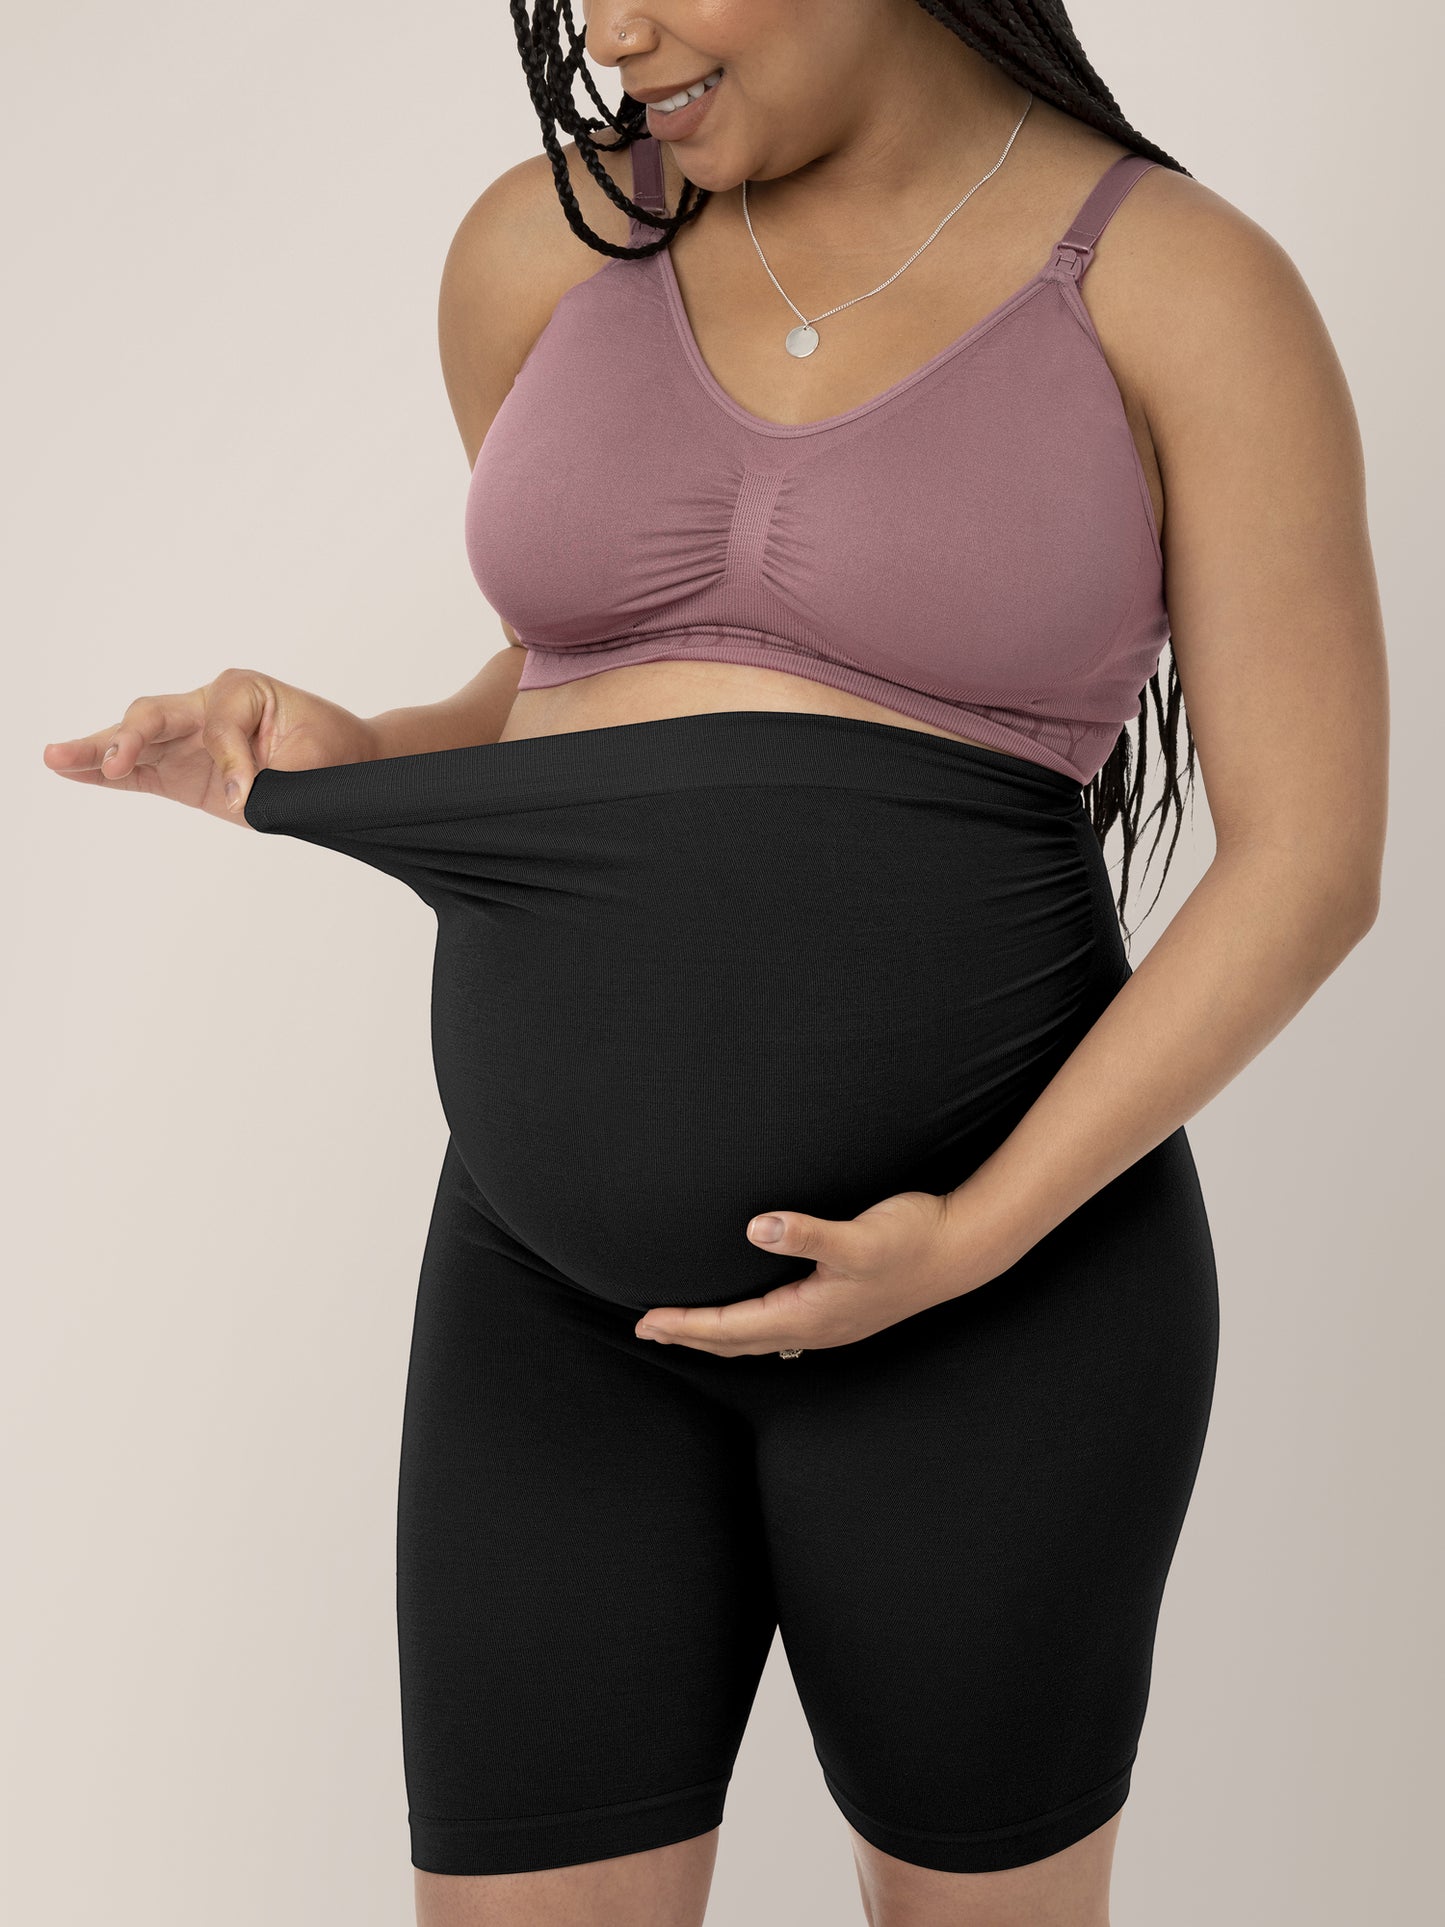 Model holding onto the waistband of the Seamless Bamboo Maternity Thigh Savers in Black